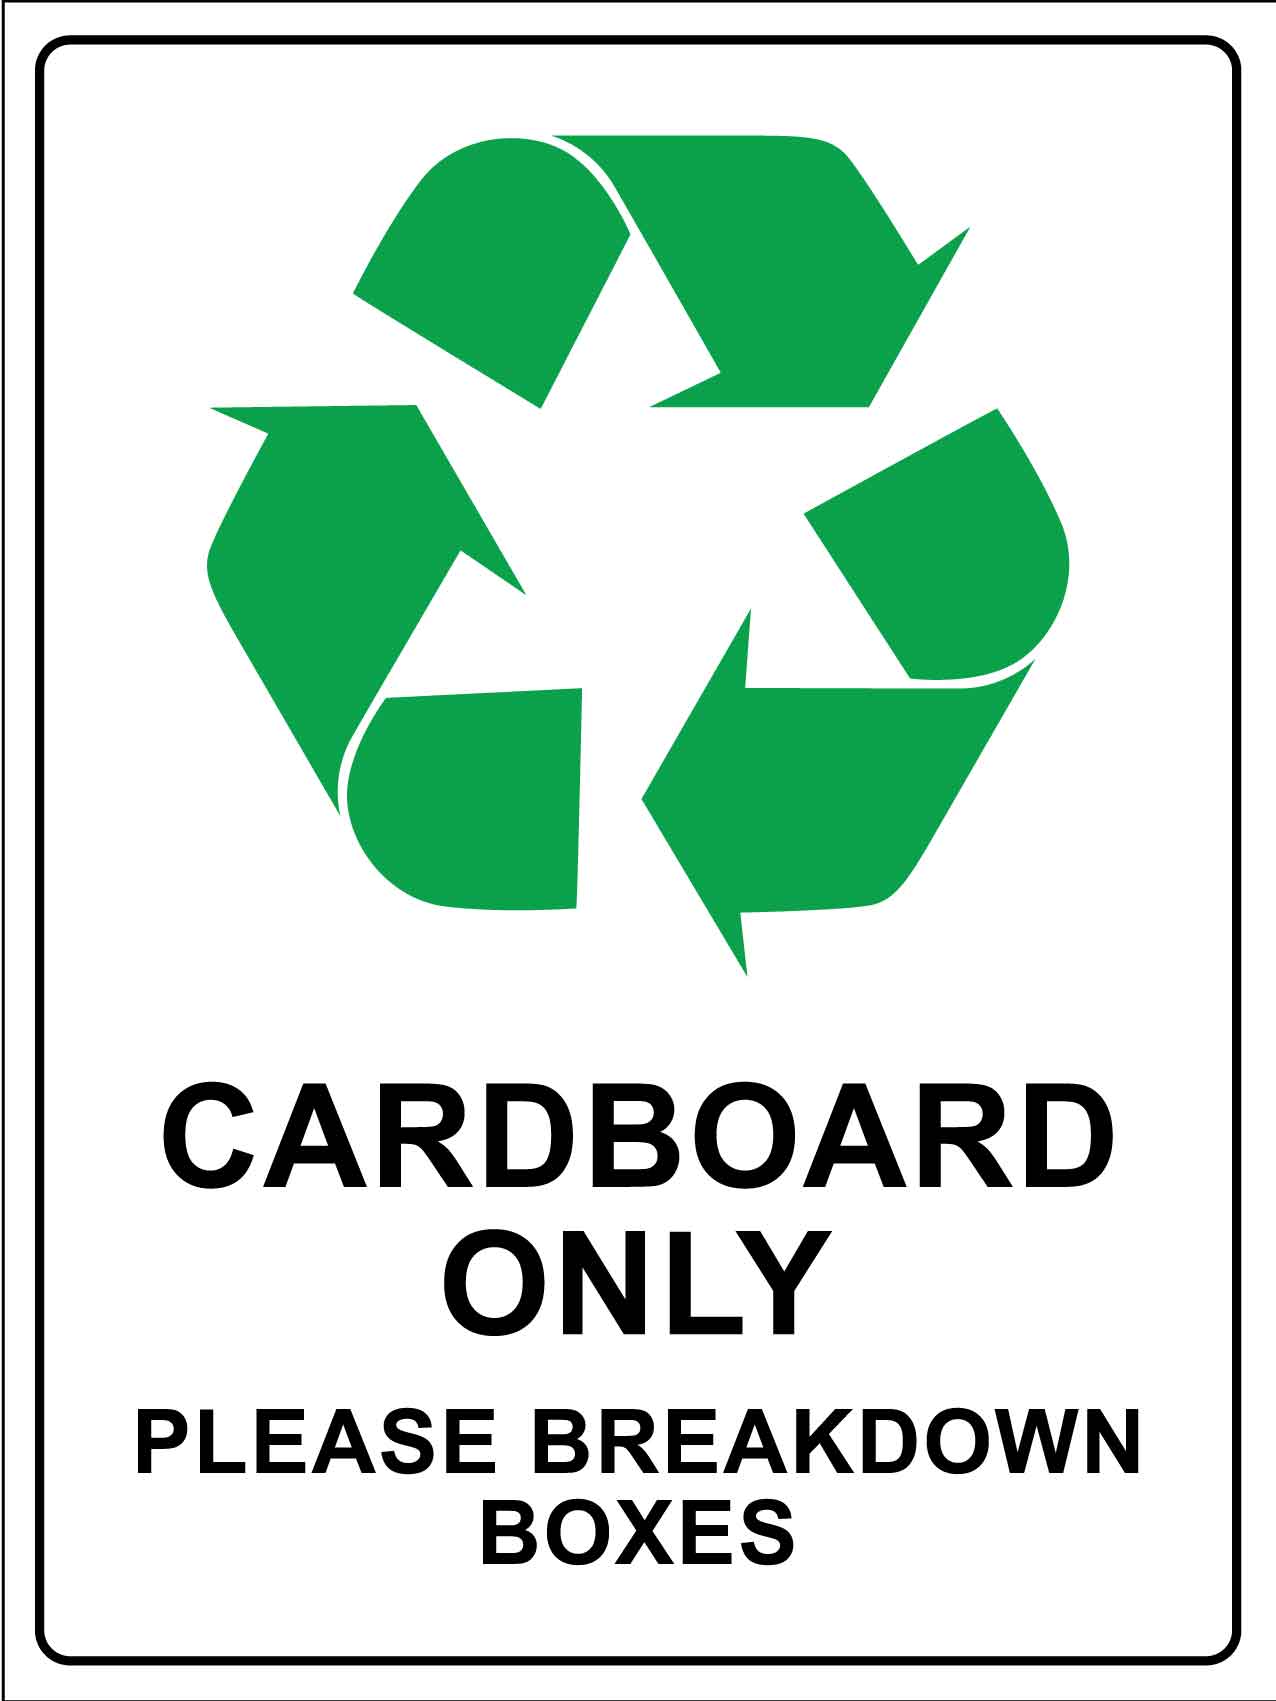 Cardboard Only Please Breakdown Boxes Sign